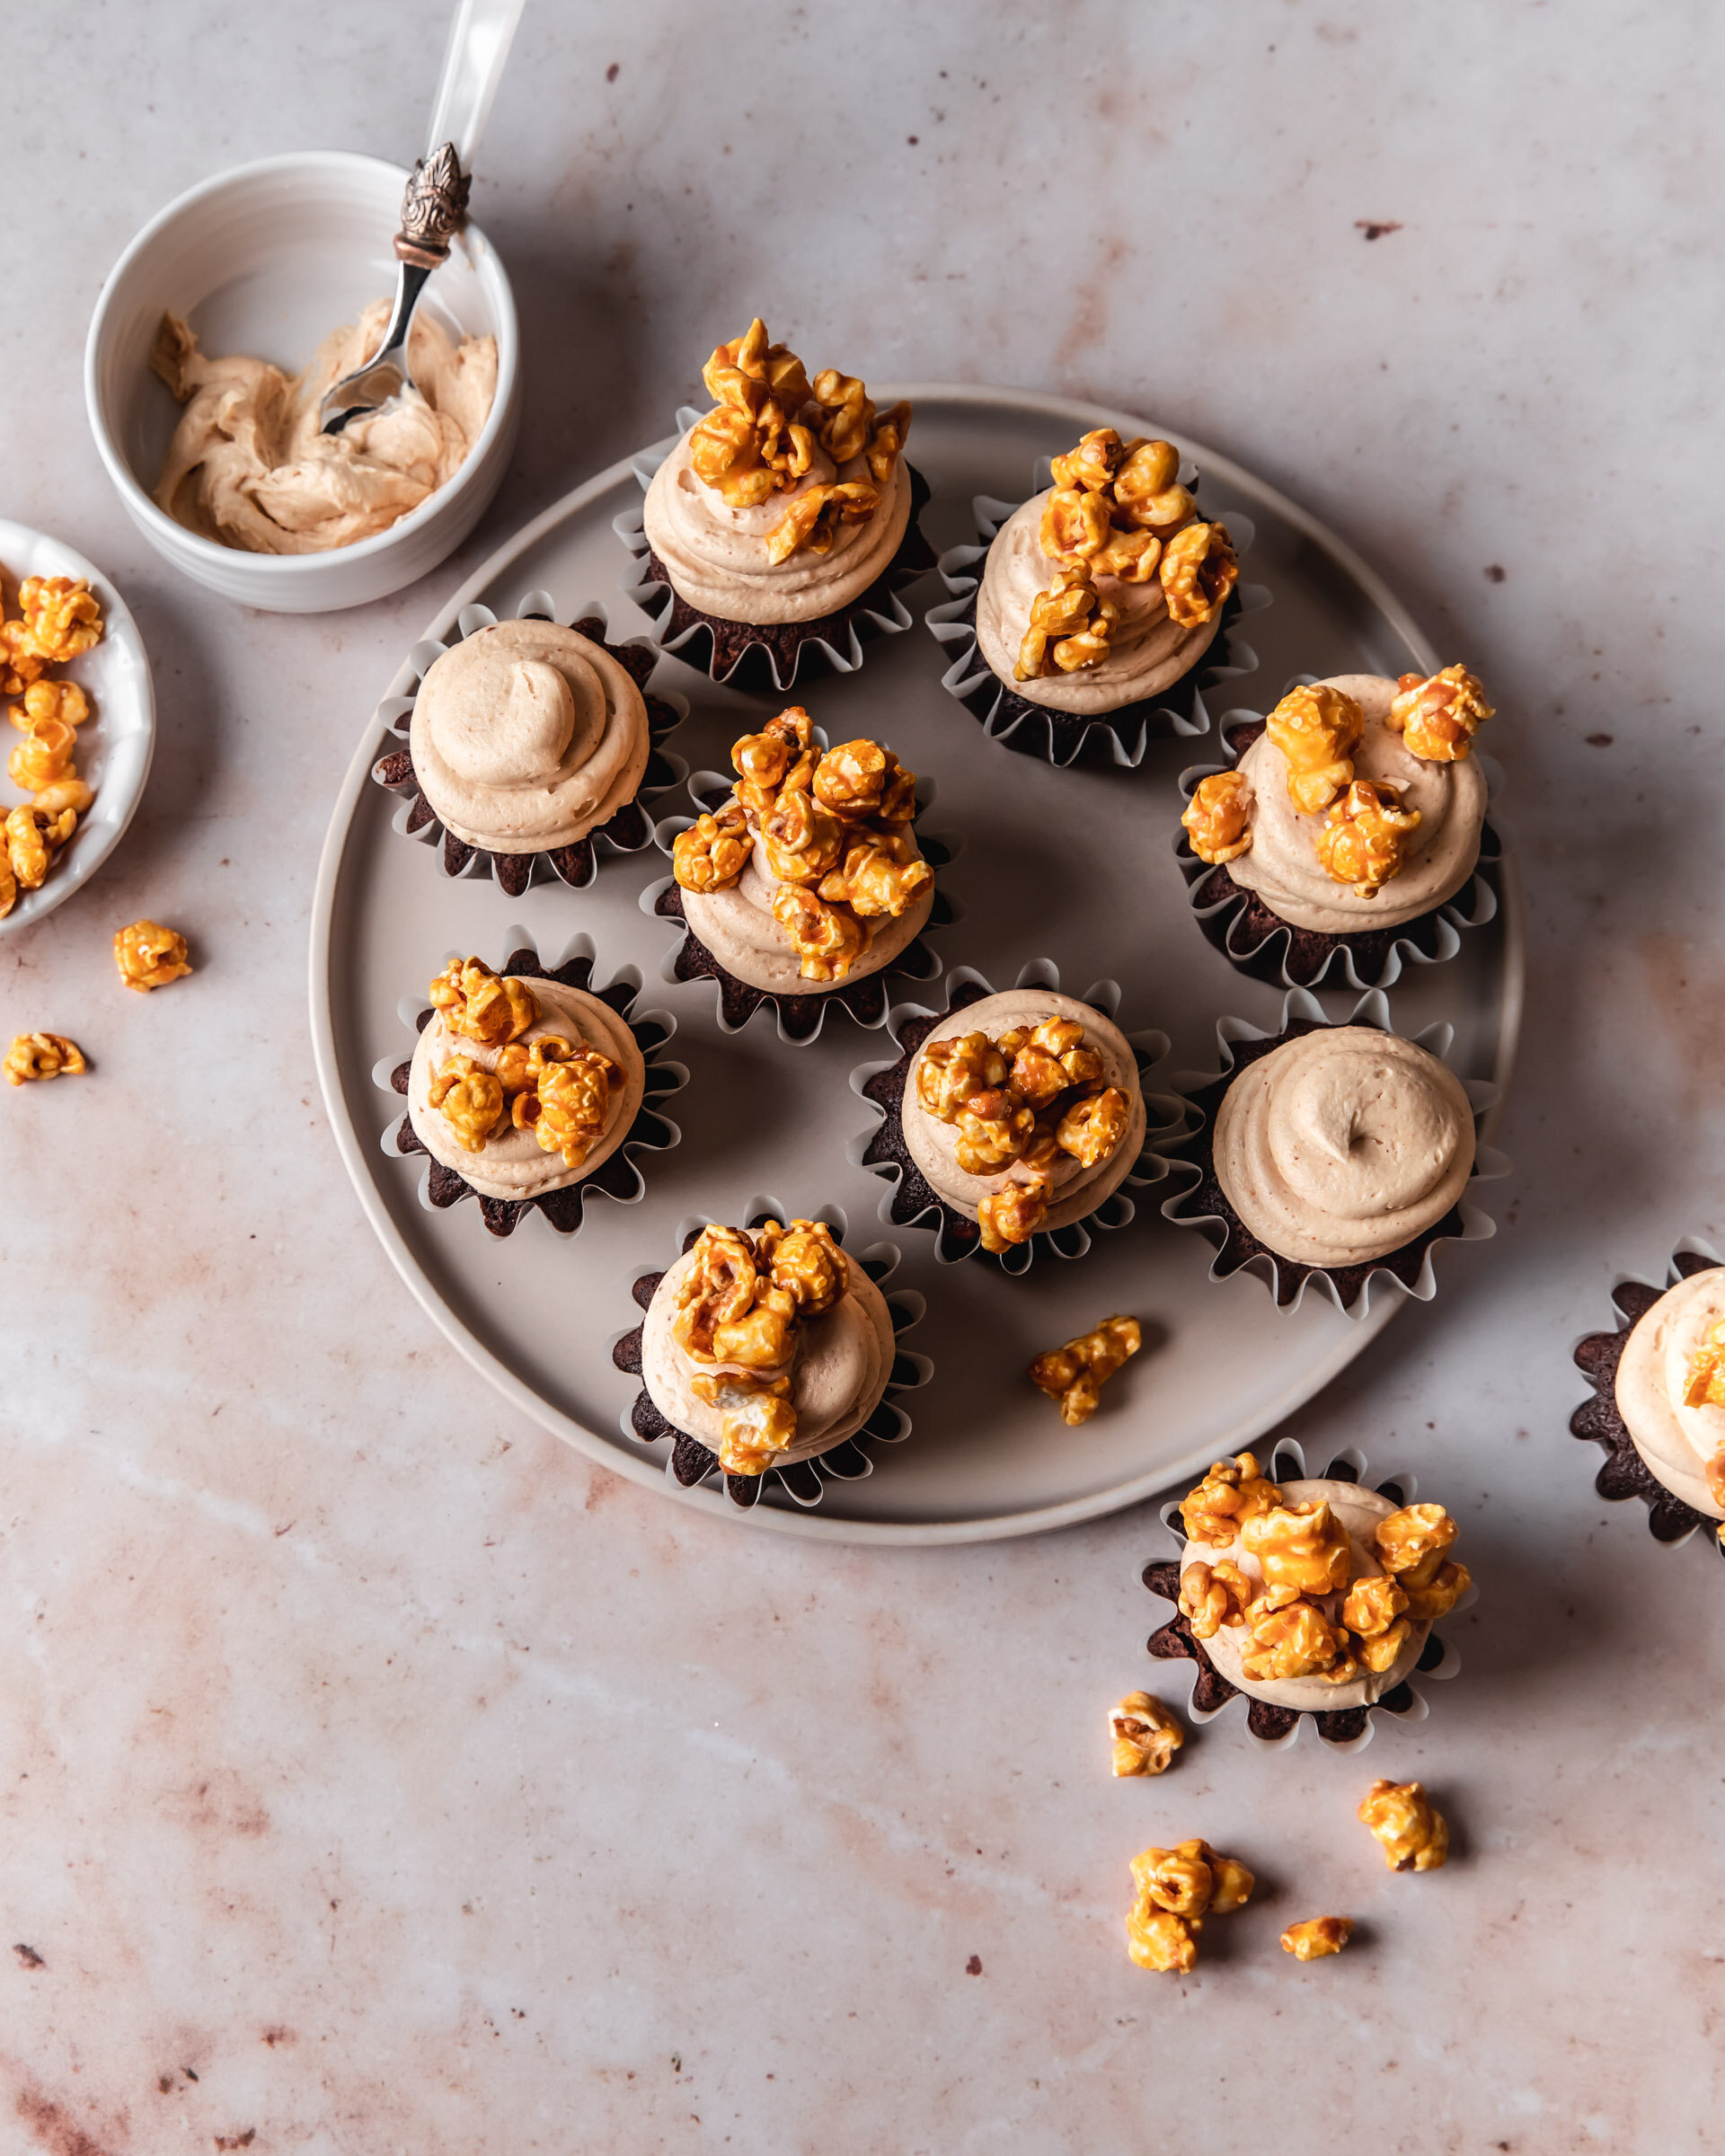 An overhead shot of a  serving plate of chocolate cupcakes with creamy peanut butter frosting and caramel popcorn on top.